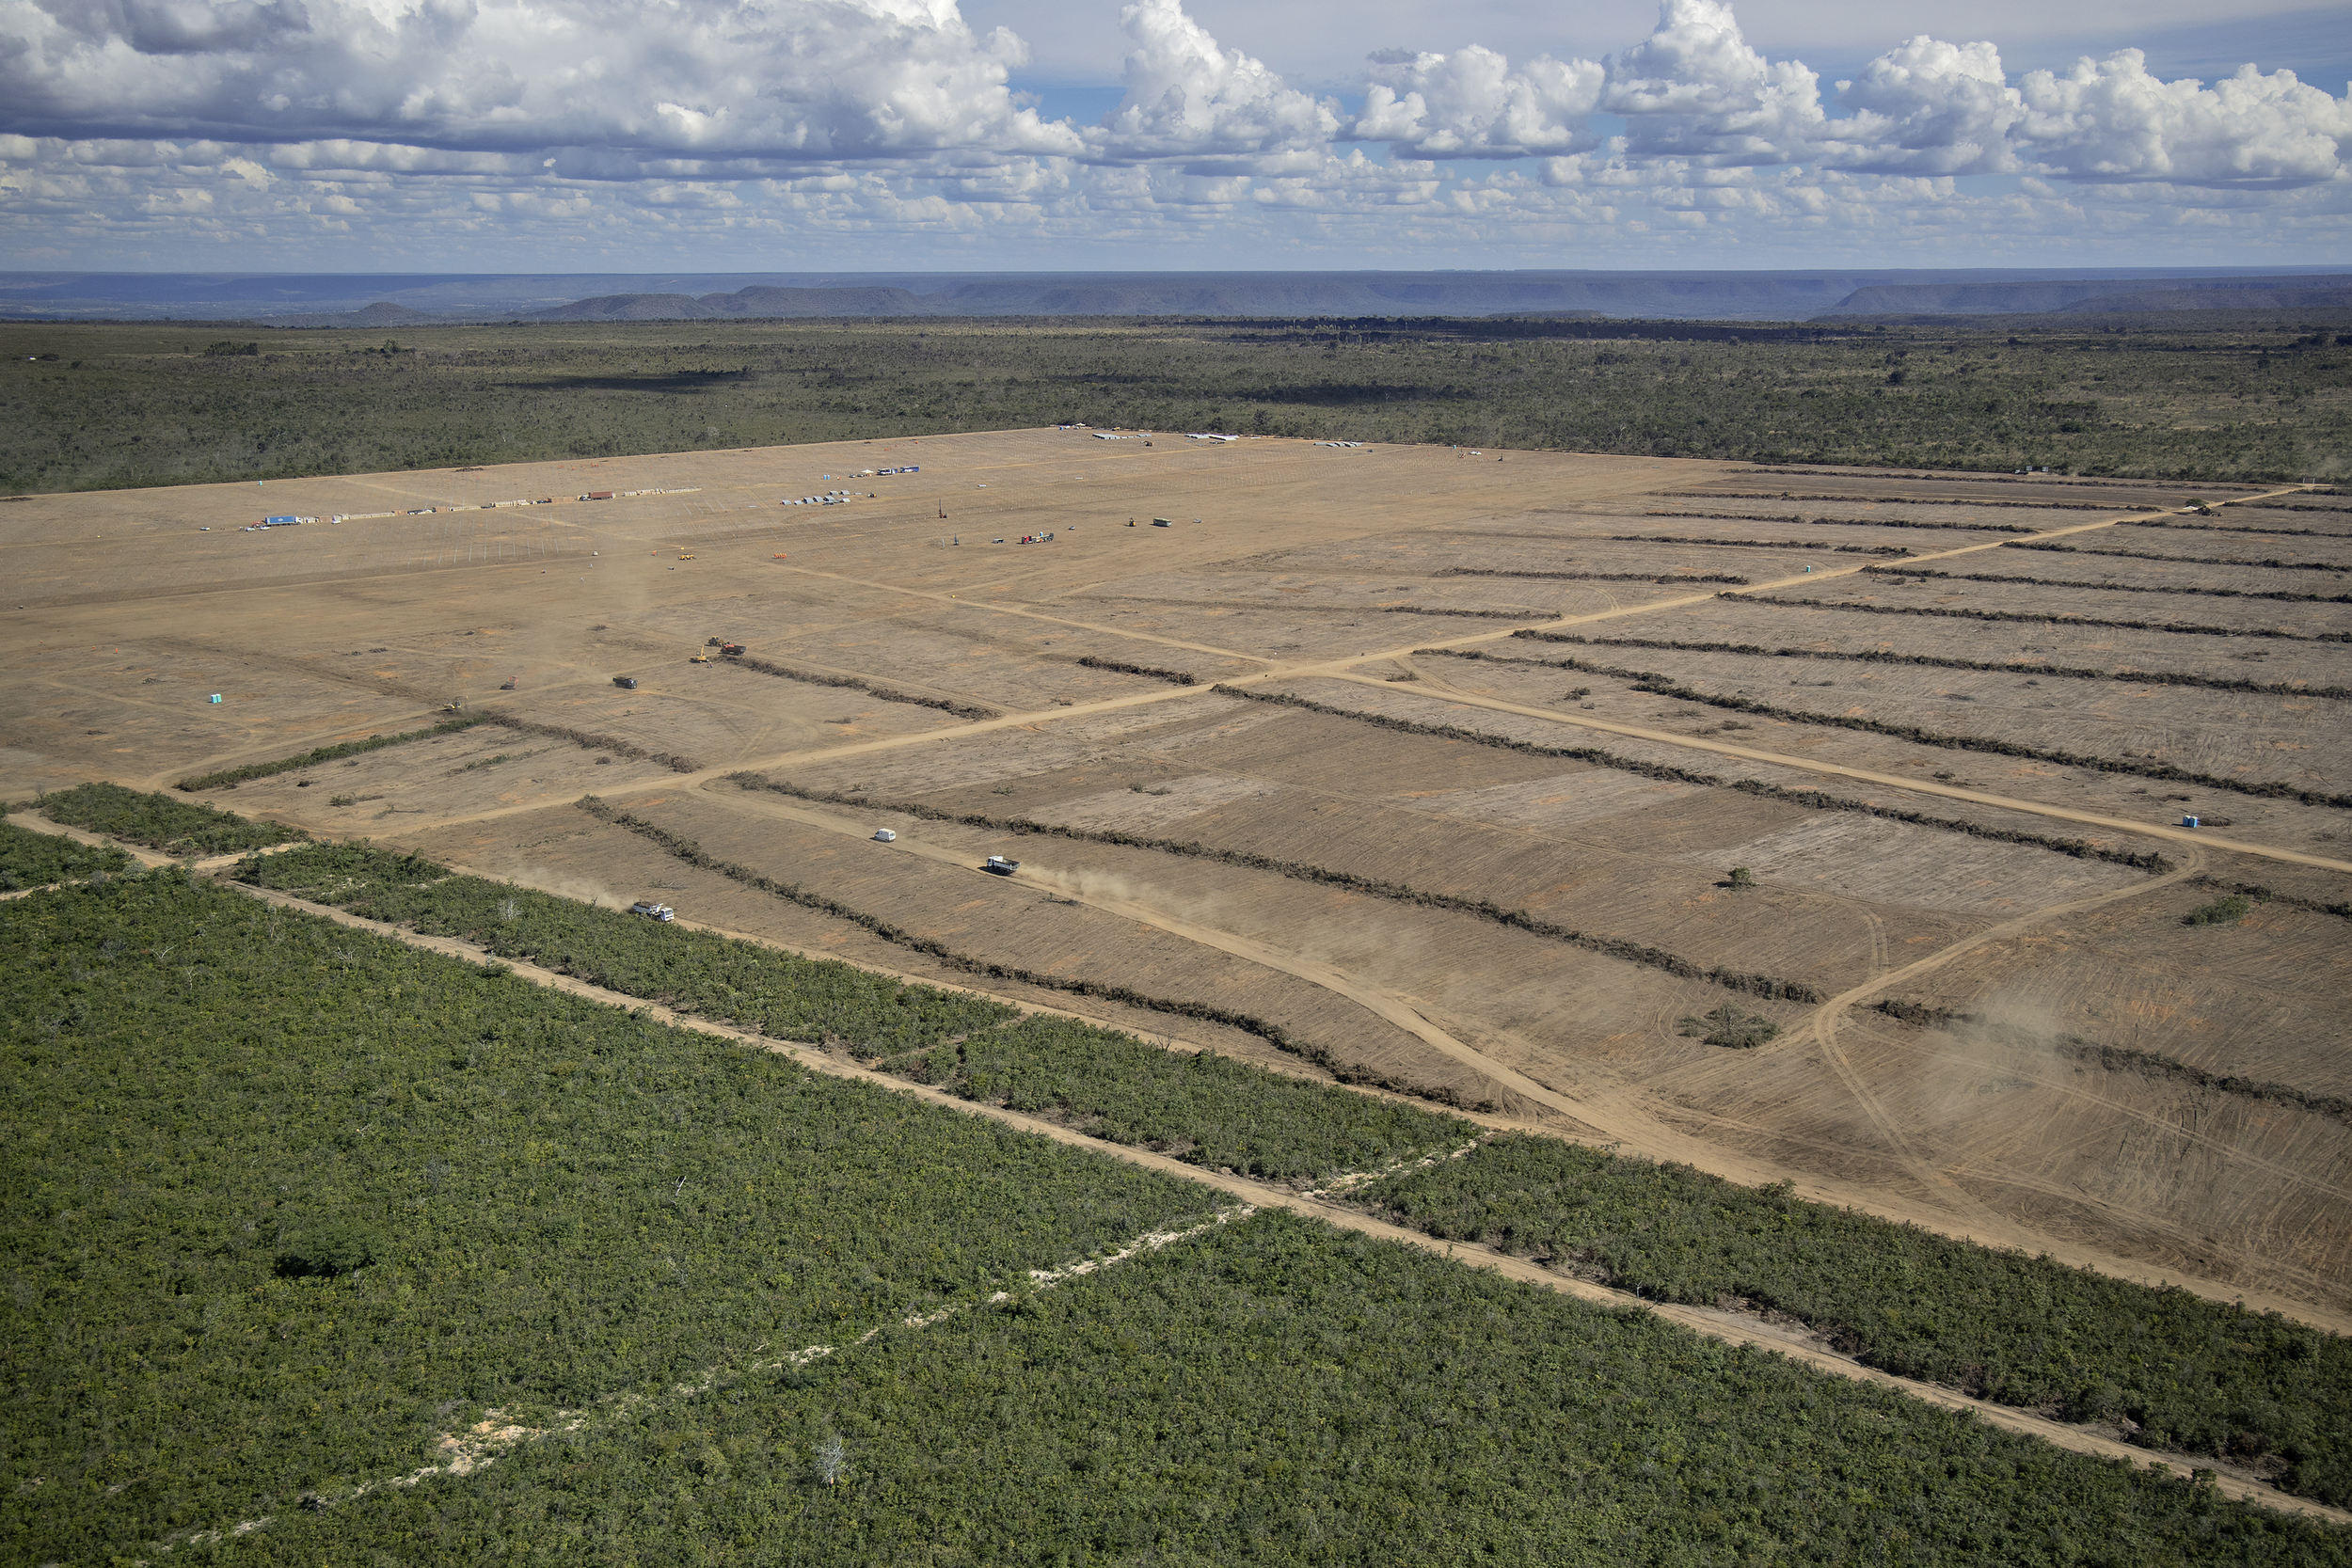 Areas of Brazil's Cerrado have been deforested for soy production (Marizilda Cruppe/Greenpeace/PA)